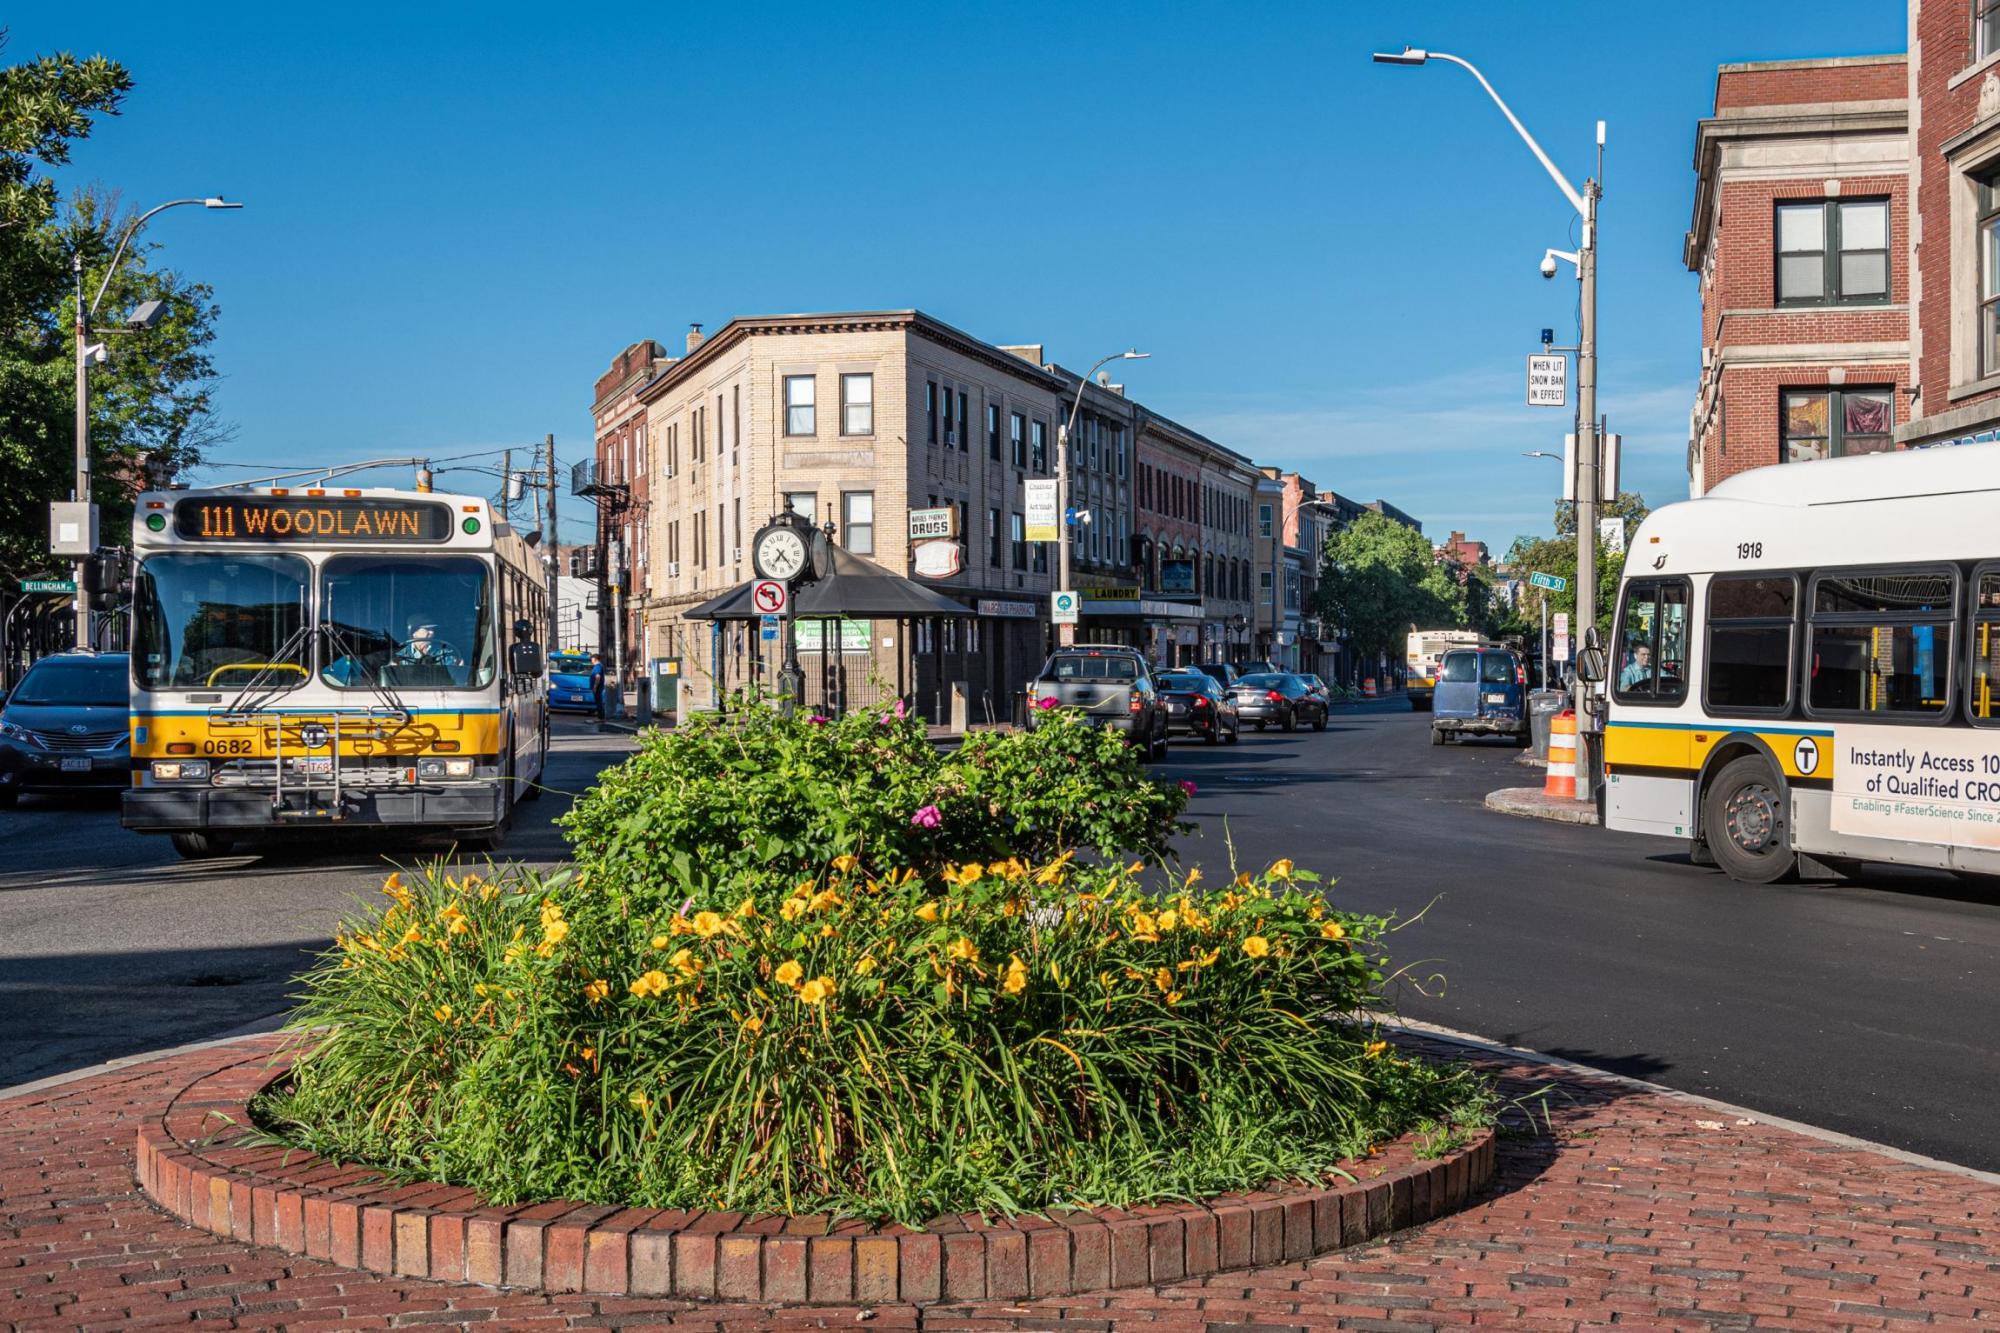 Route 111 Bus in a roundabout in Chelsea, during summertime